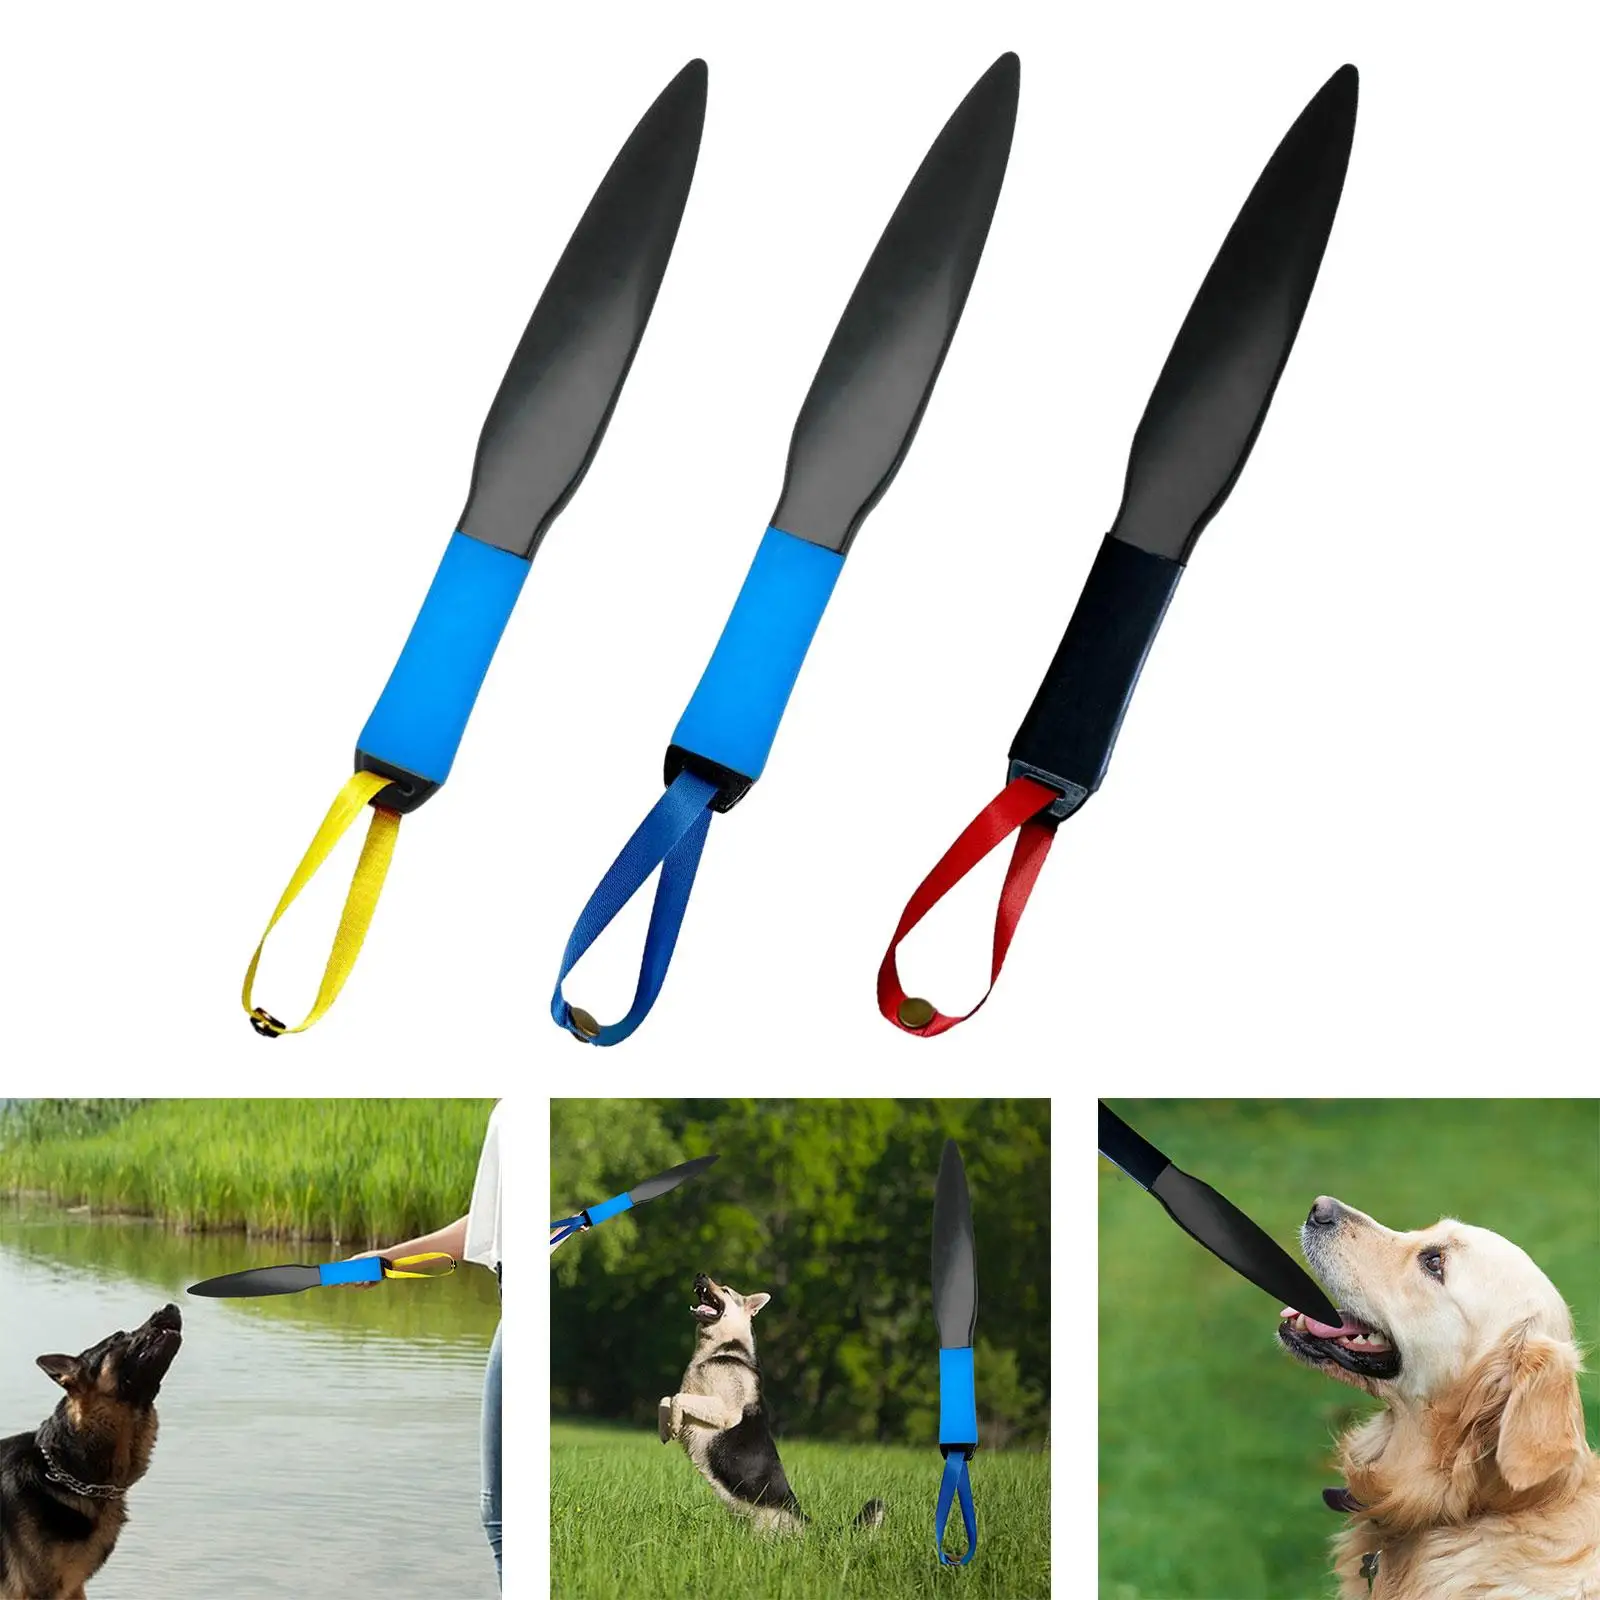 Pet Crowbar Protective Separates Chew Toys Nylon Food Aggressions Dog Bite Training Stick for Small Medium Dogs Training